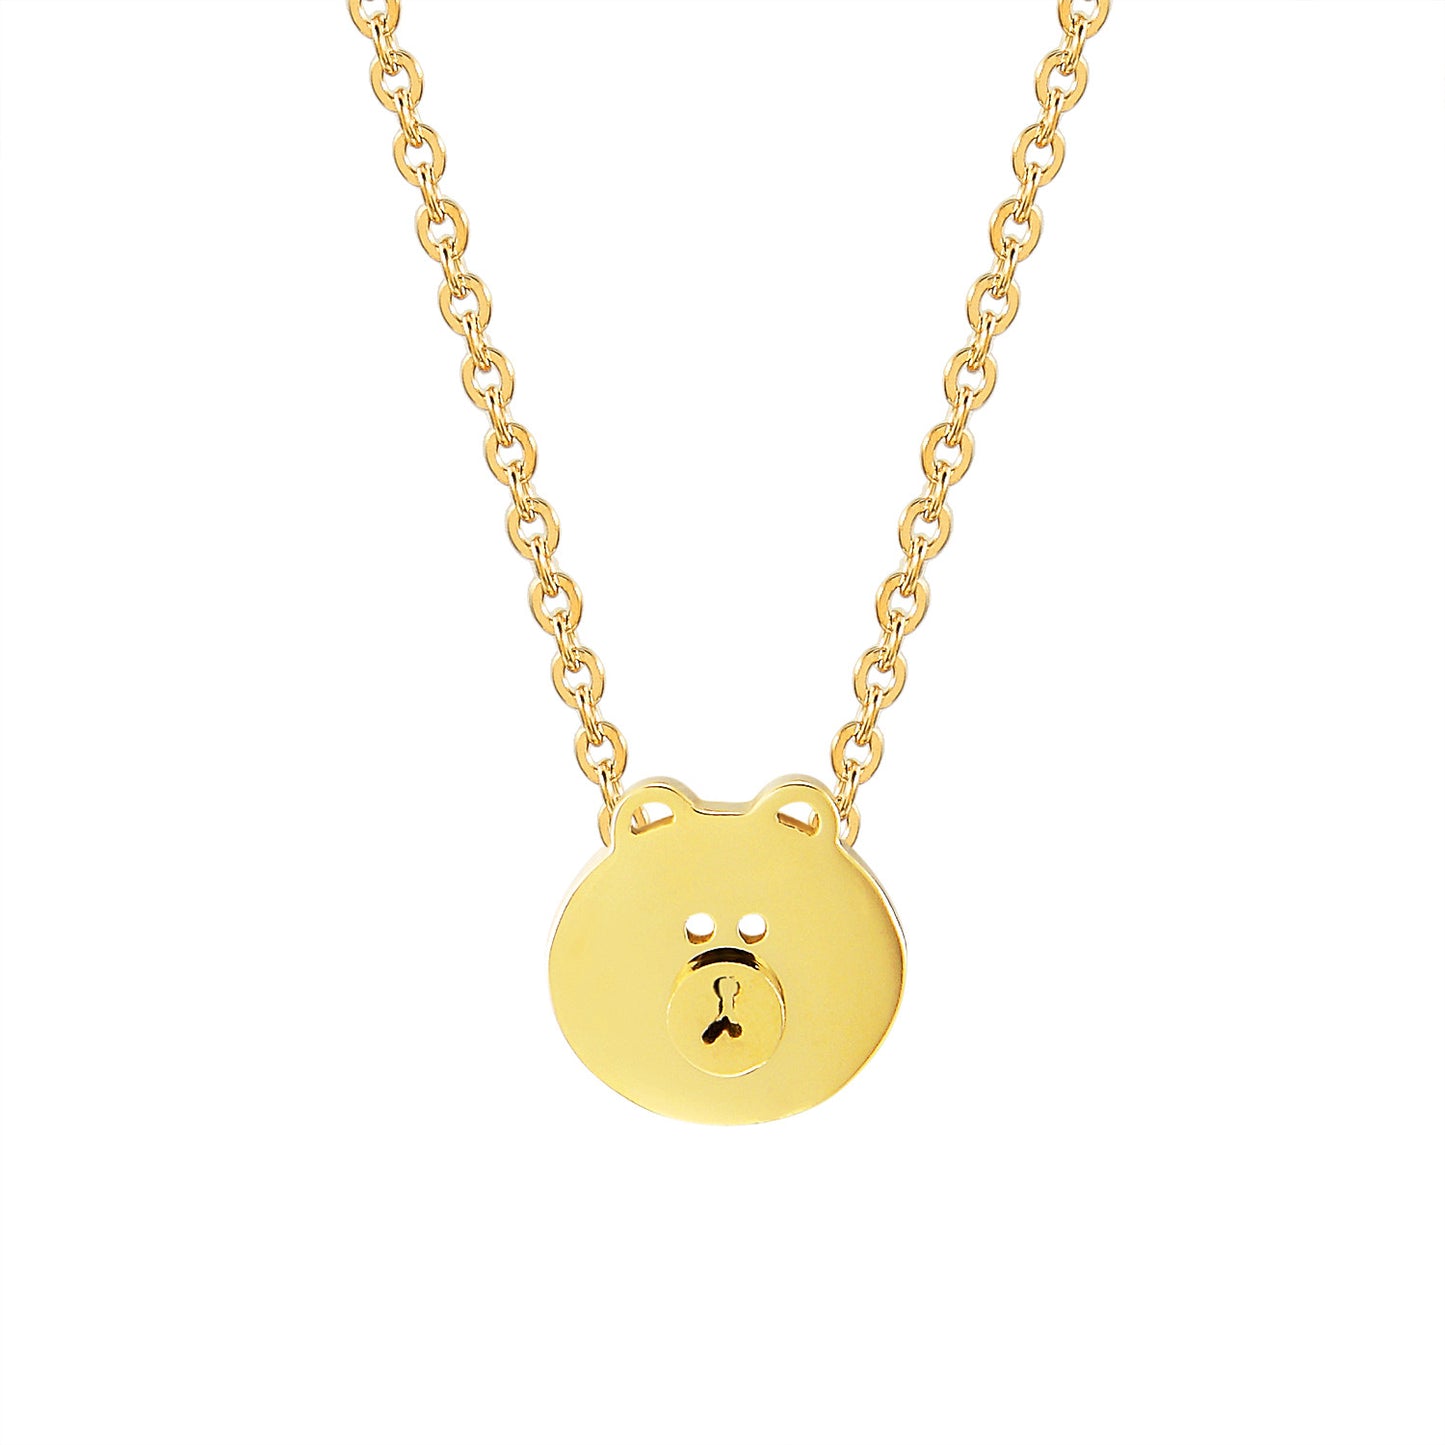 Teddy Bear Choker Charm Chain 14k Gold Finish Stainless Steel 0.4" Dainty Necklace